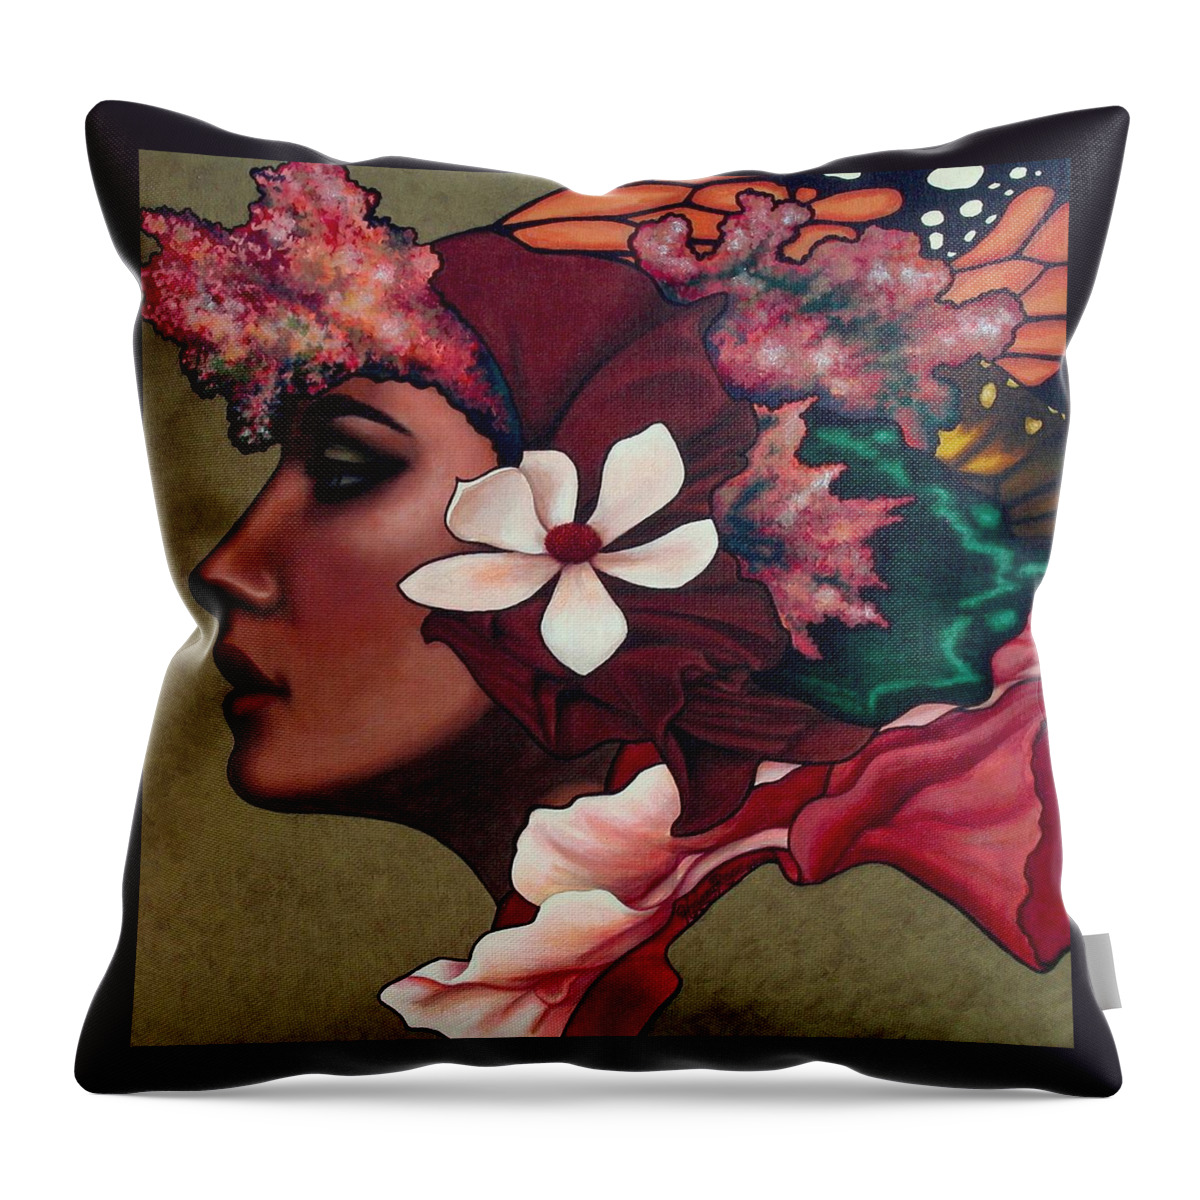 Woman Throw Pillow featuring the painting The Oracle by Helena Rose